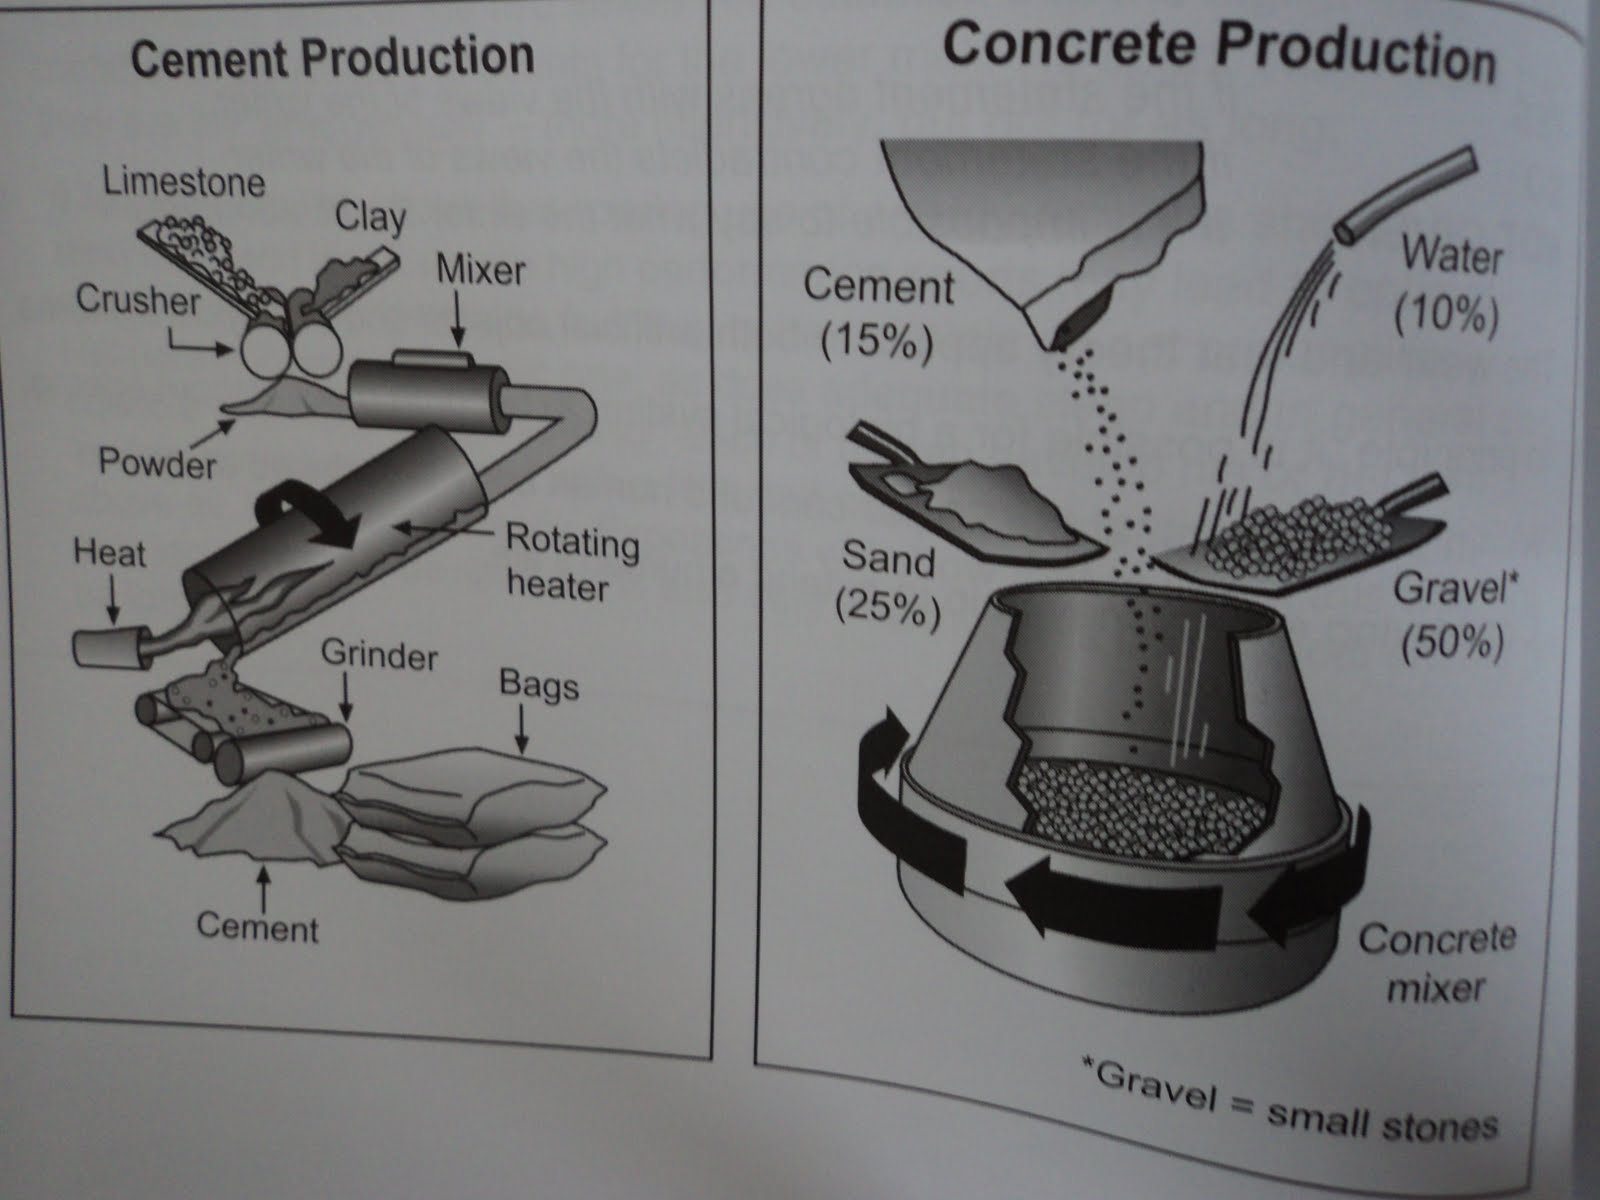 The diagrams below show the stages and equipment used in the cement